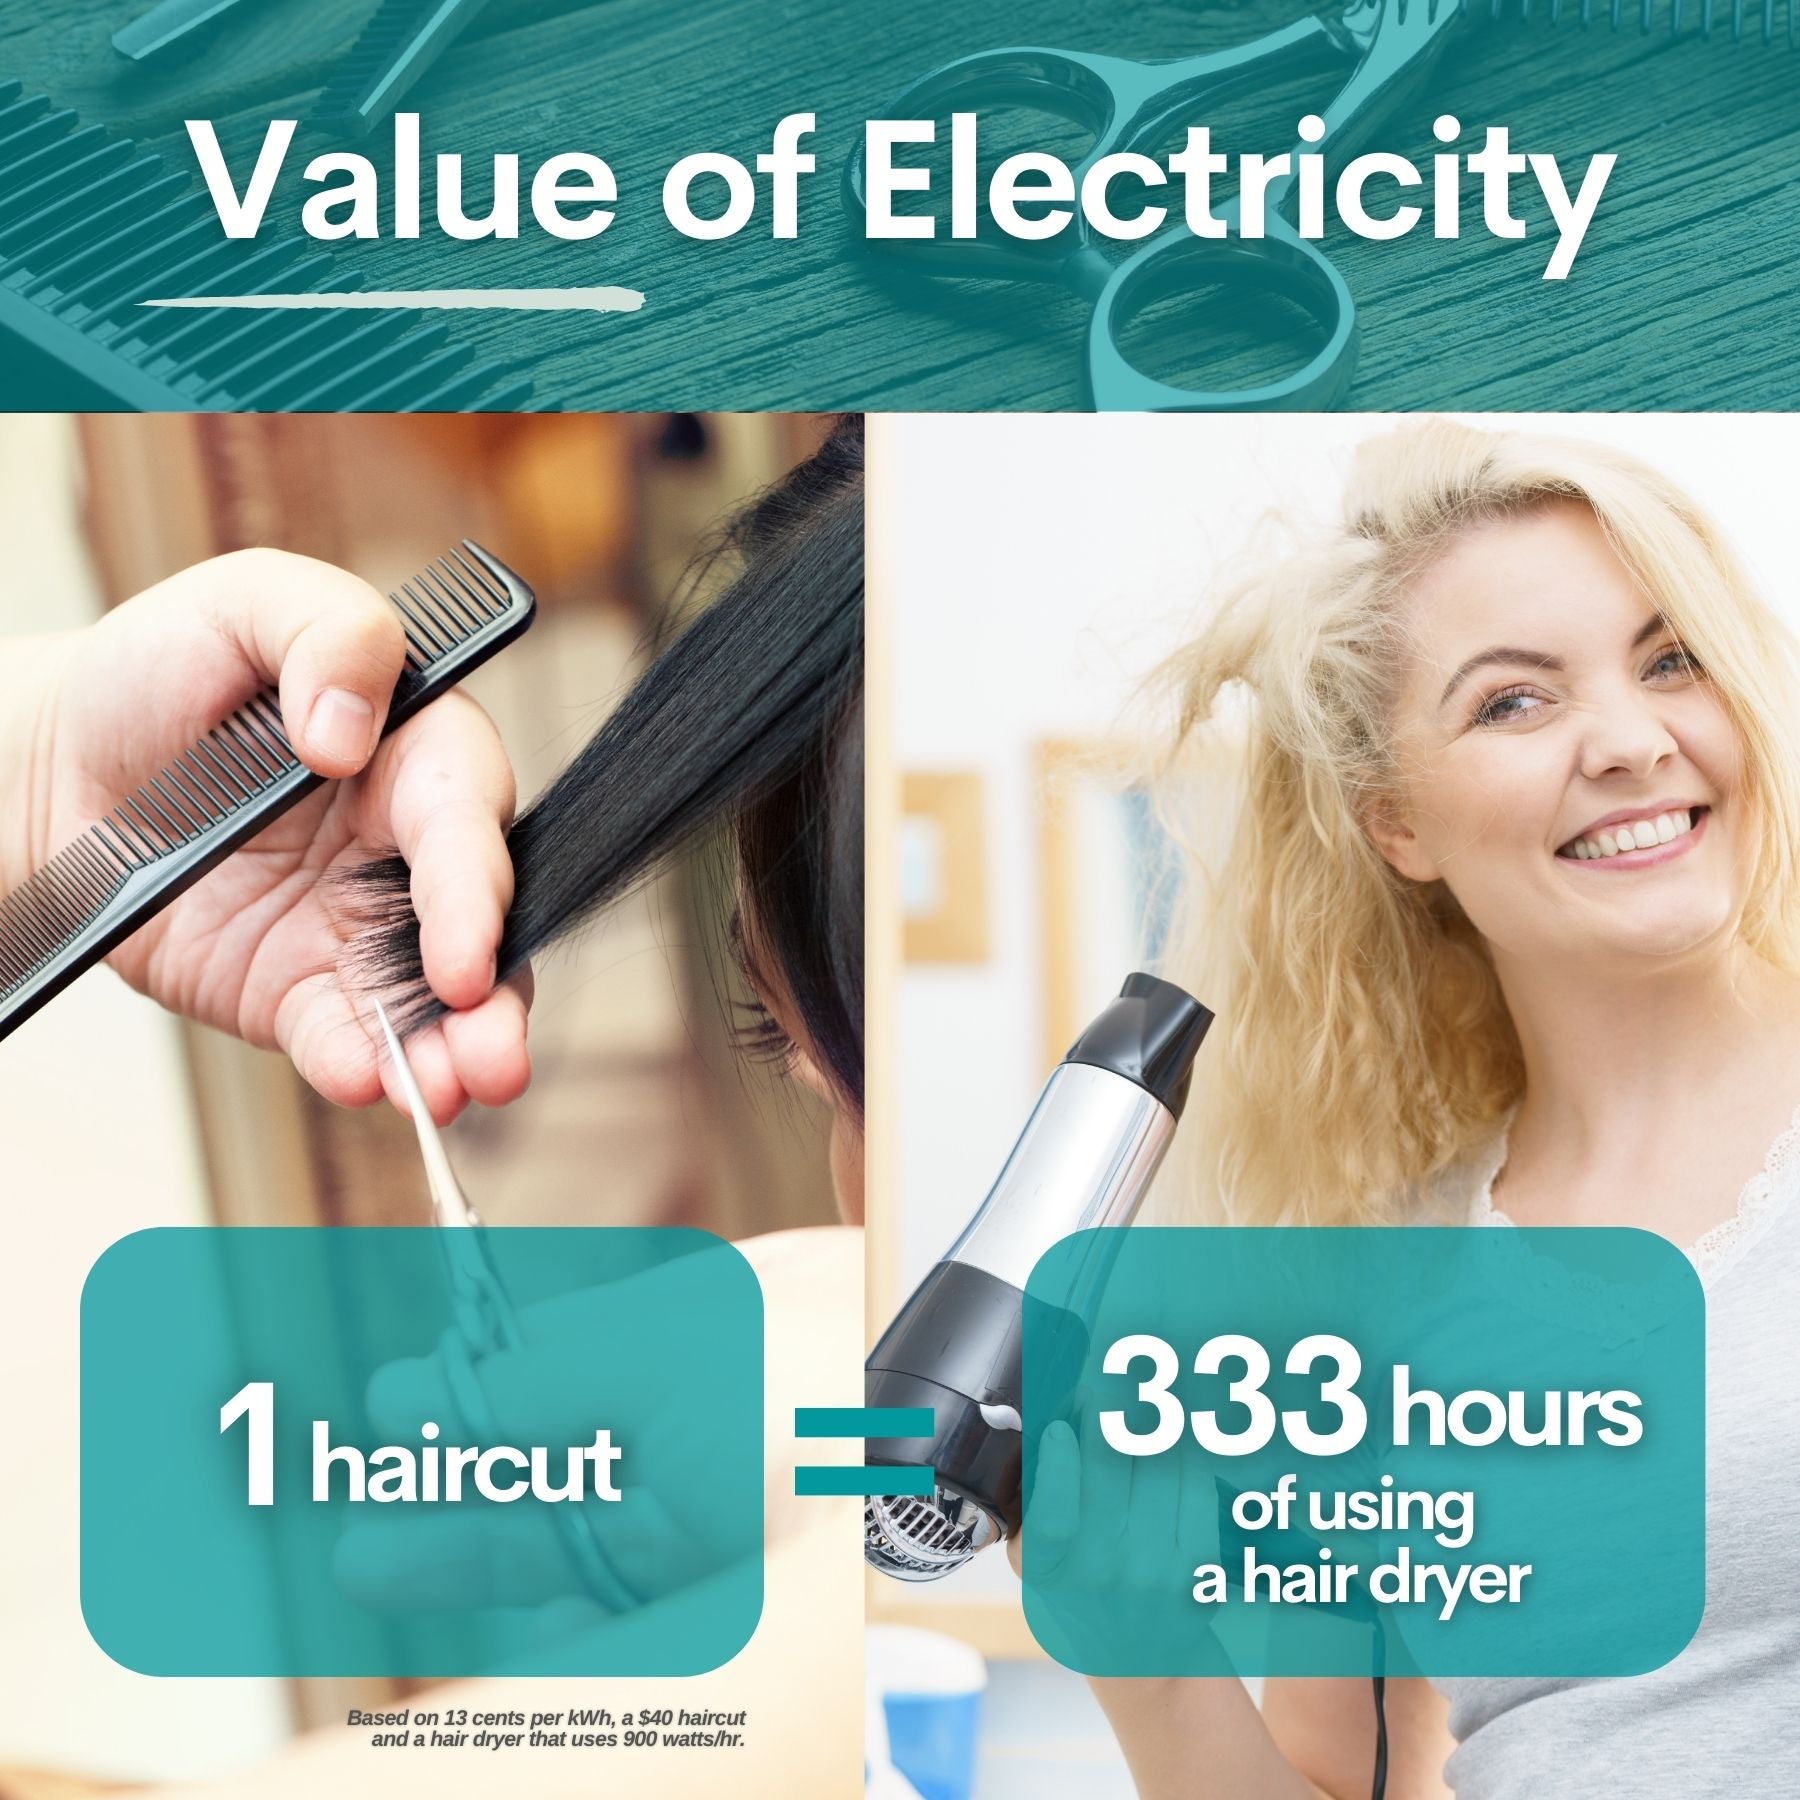 Photo showing 1 haircut costs the same as 333 hours of running a hair dryer.